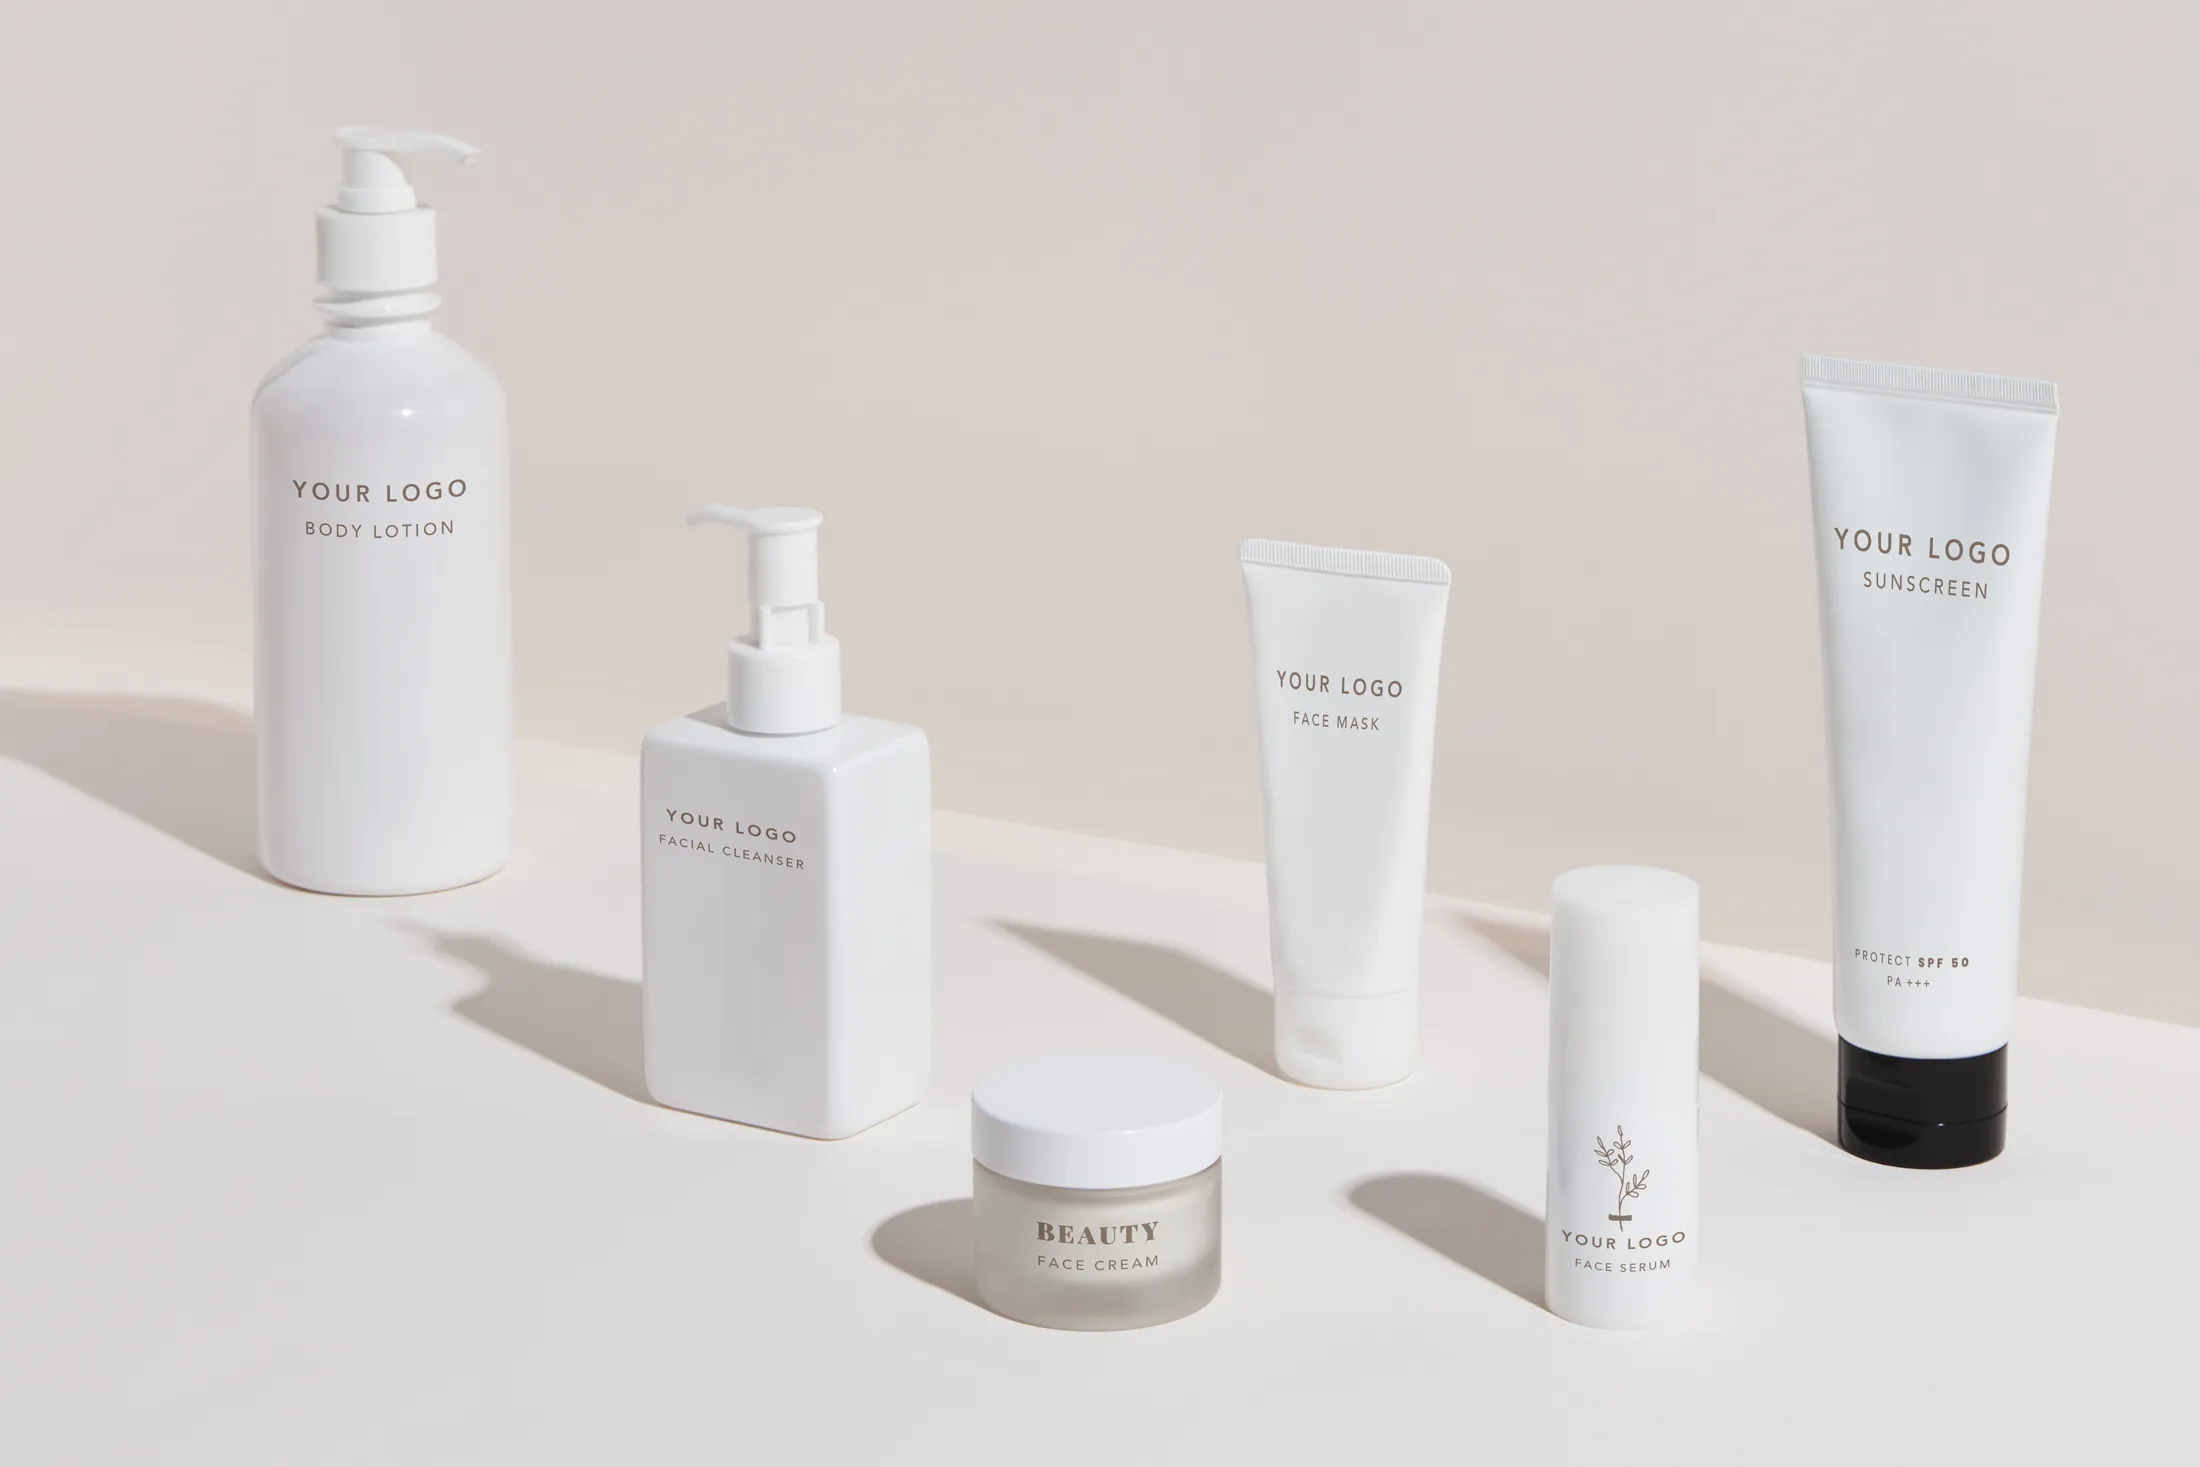 The Best How To Start A Skincare Line Marketing Ideas